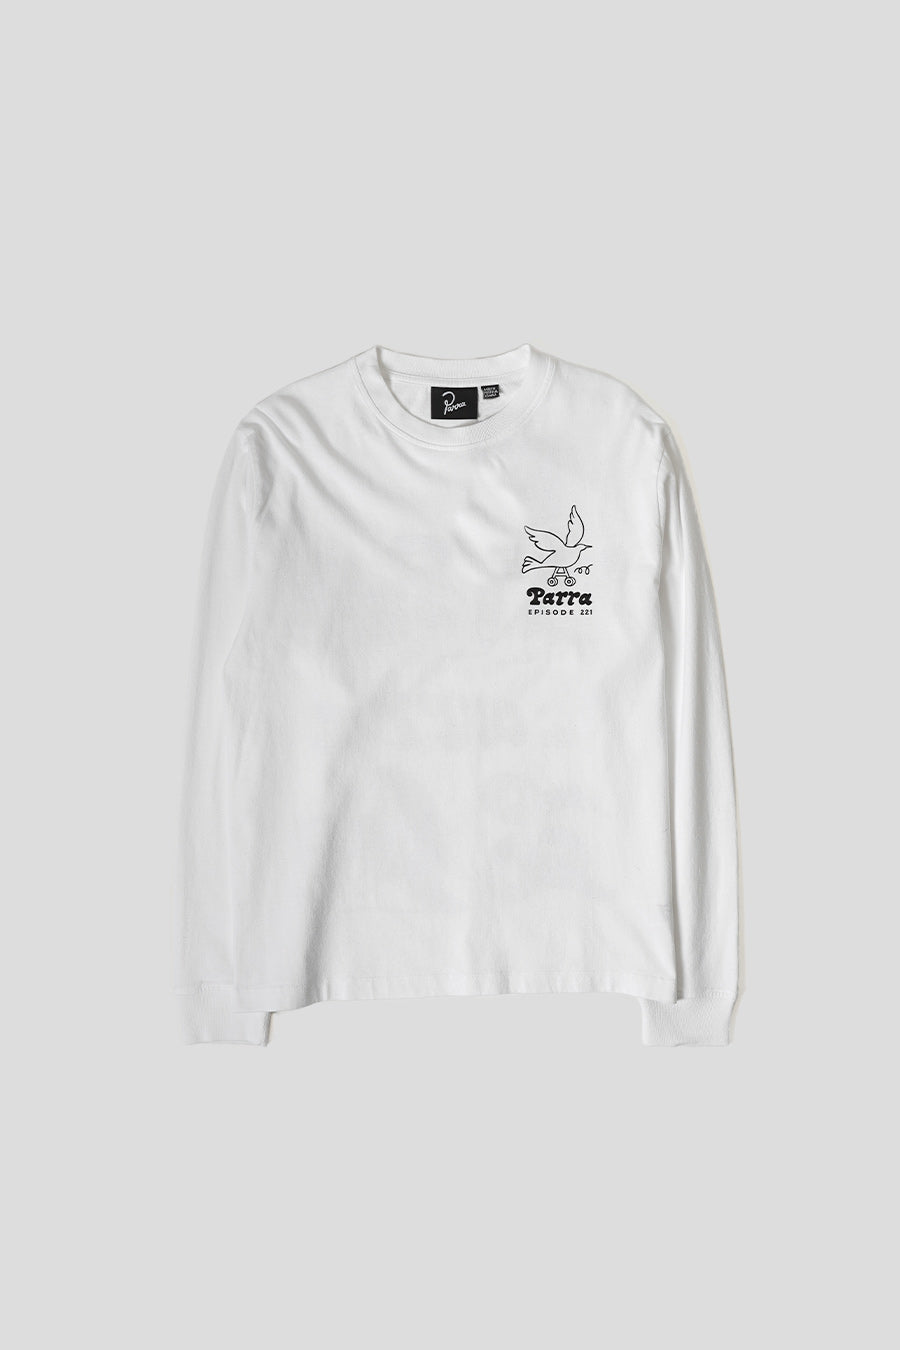 BY PARRA - T-SHIRT CHAIR PENCIL LONG SLEEVE WHITE - LE LABO STORE